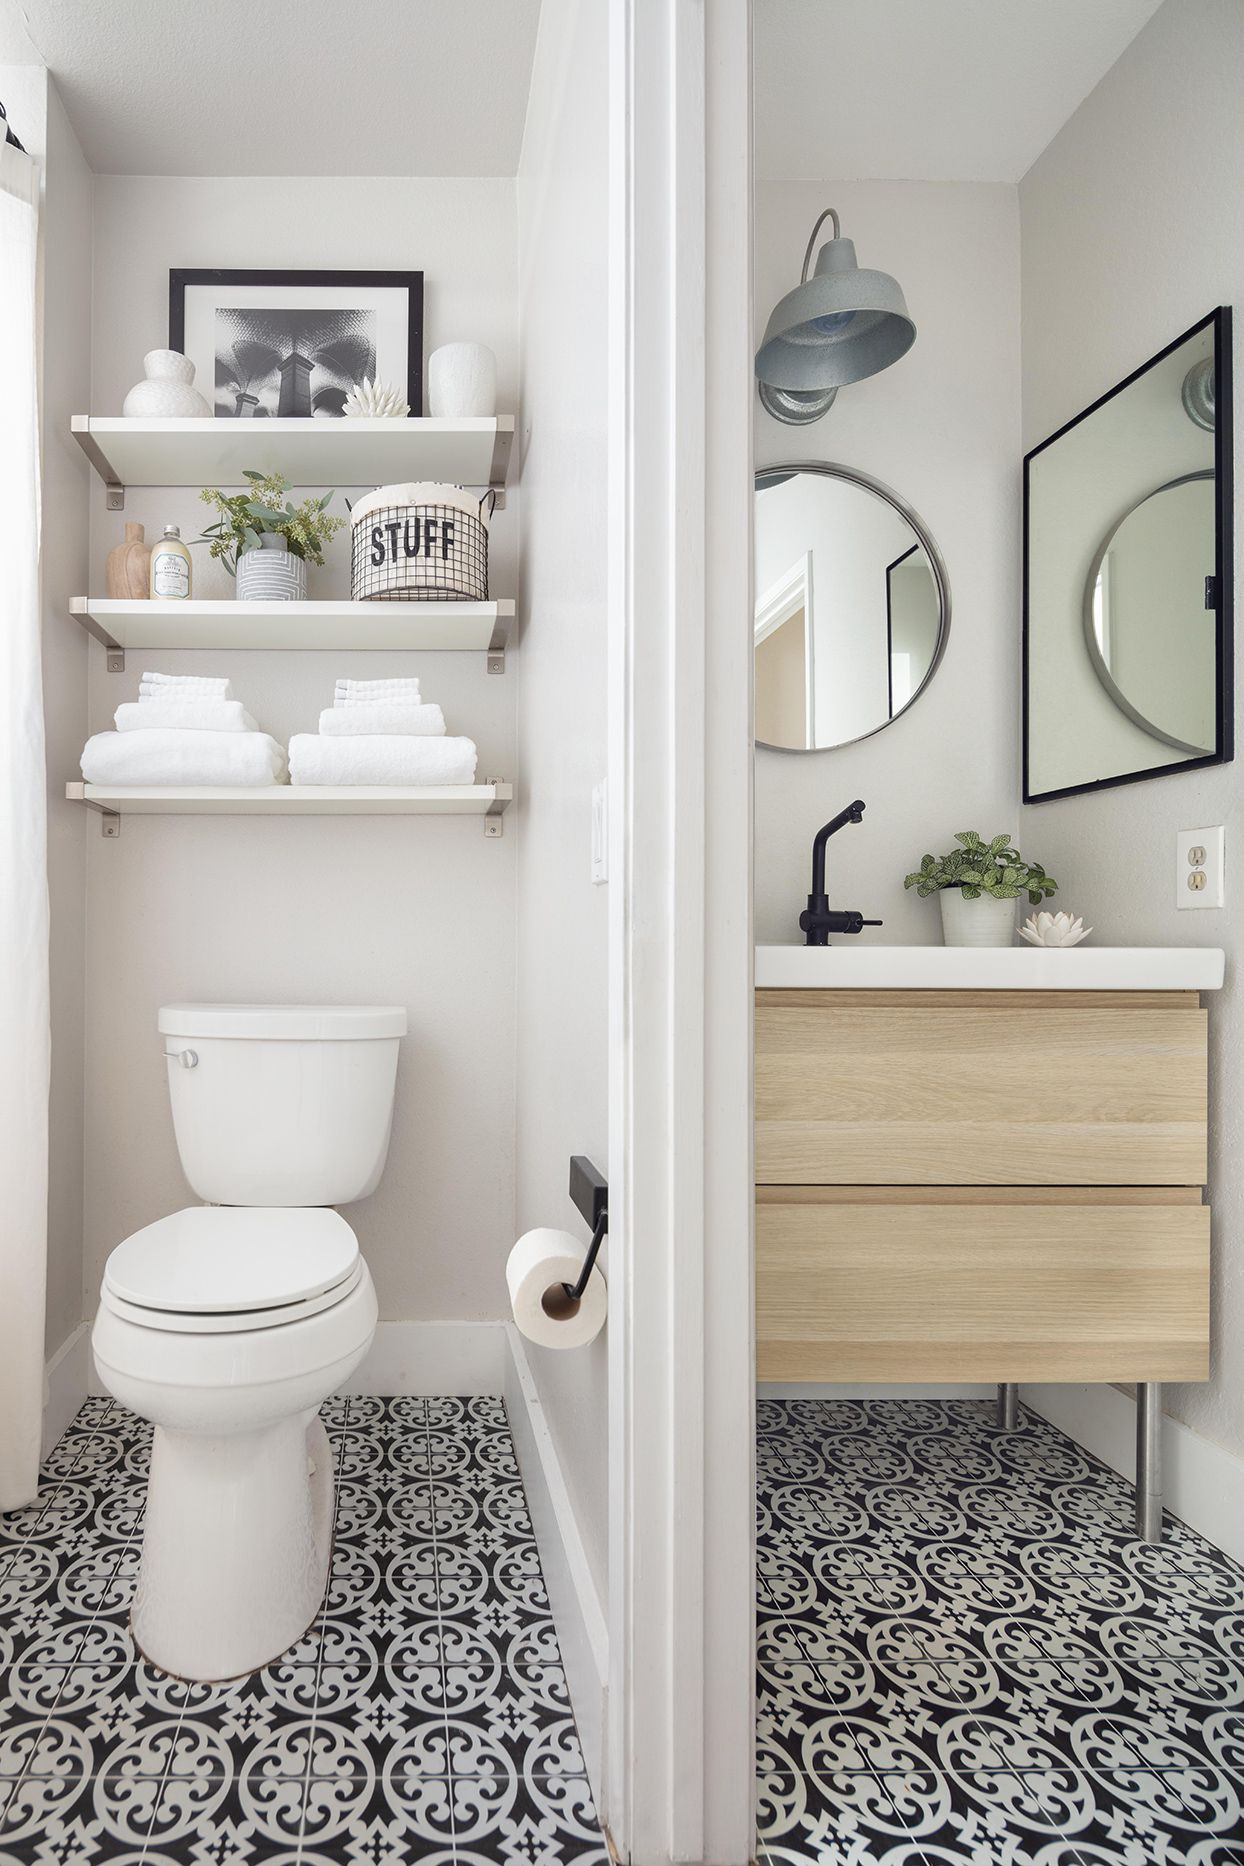 Steps to Styling Bathroom Shelves That Don